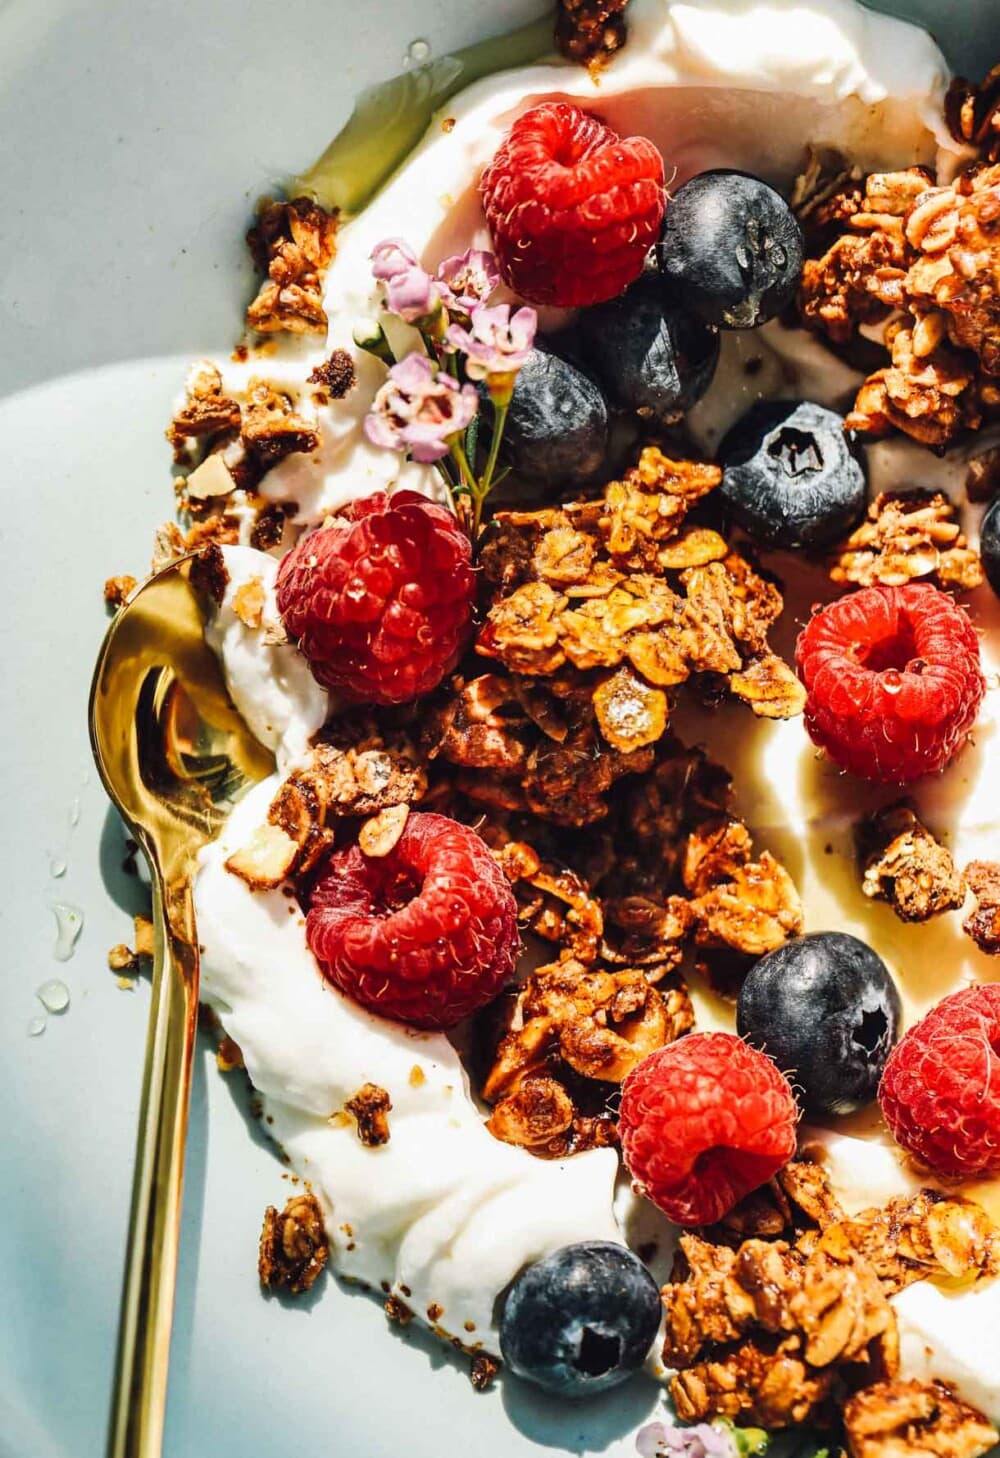 yogurt in a bowl with granola, rapsberries, blueberries, with a gold spoon.